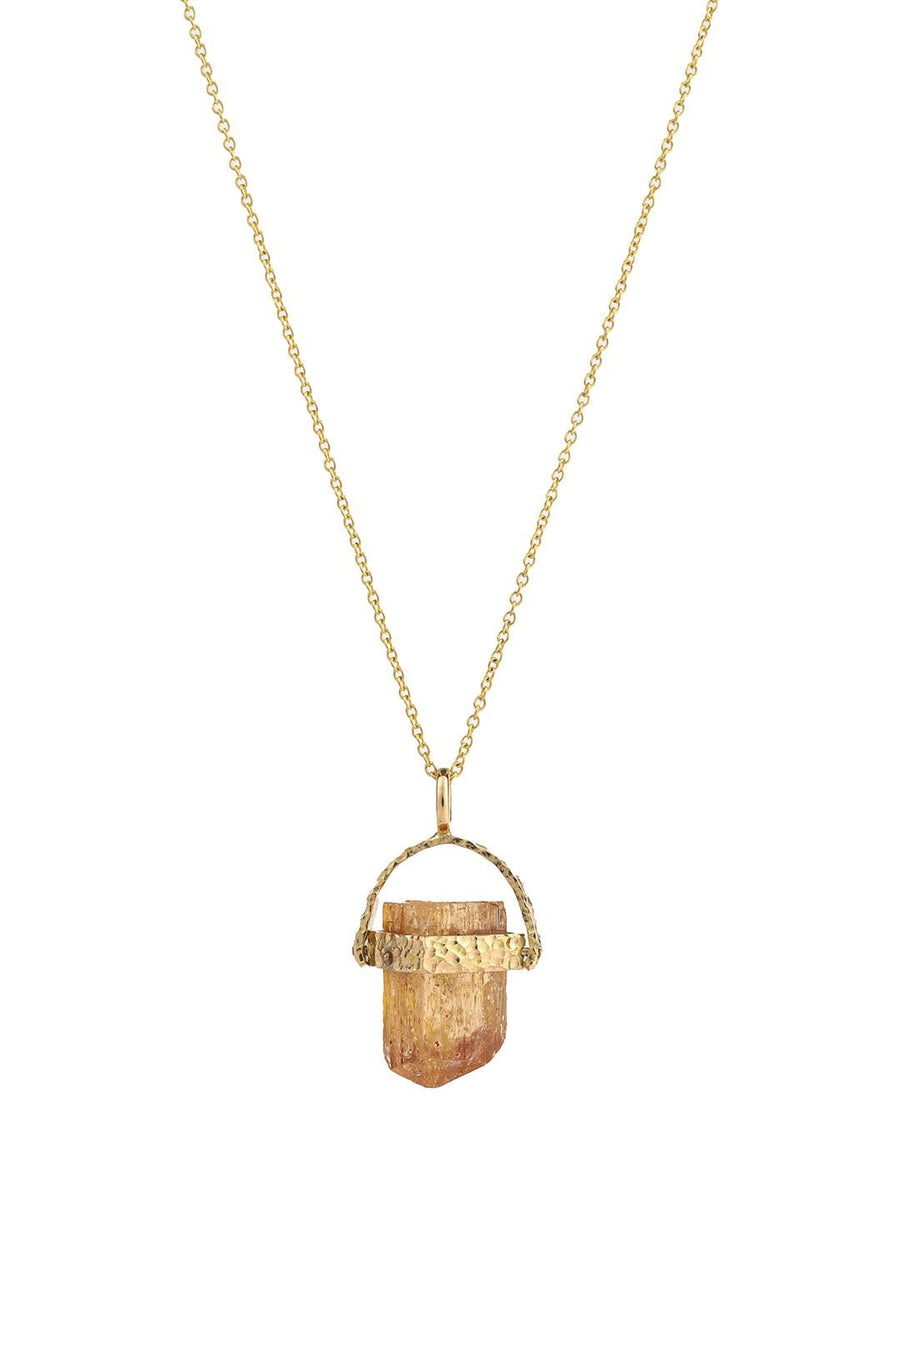 DRAGON TOOTH NECKLACE, STRAW TOPAZ - Burning Torch Online Boutique